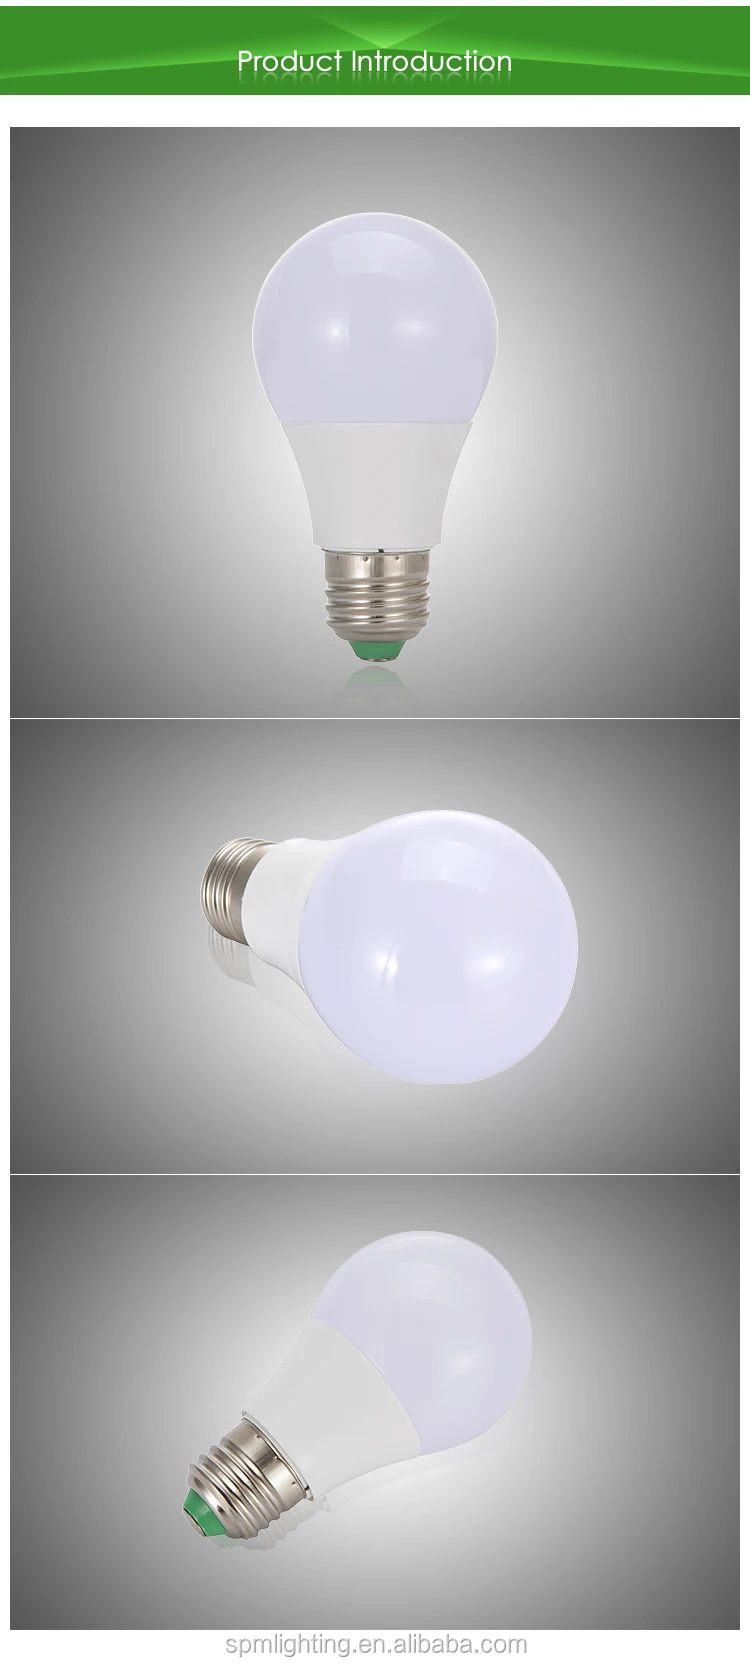 Wholesale Apparel led bulb raw material with wholesale price